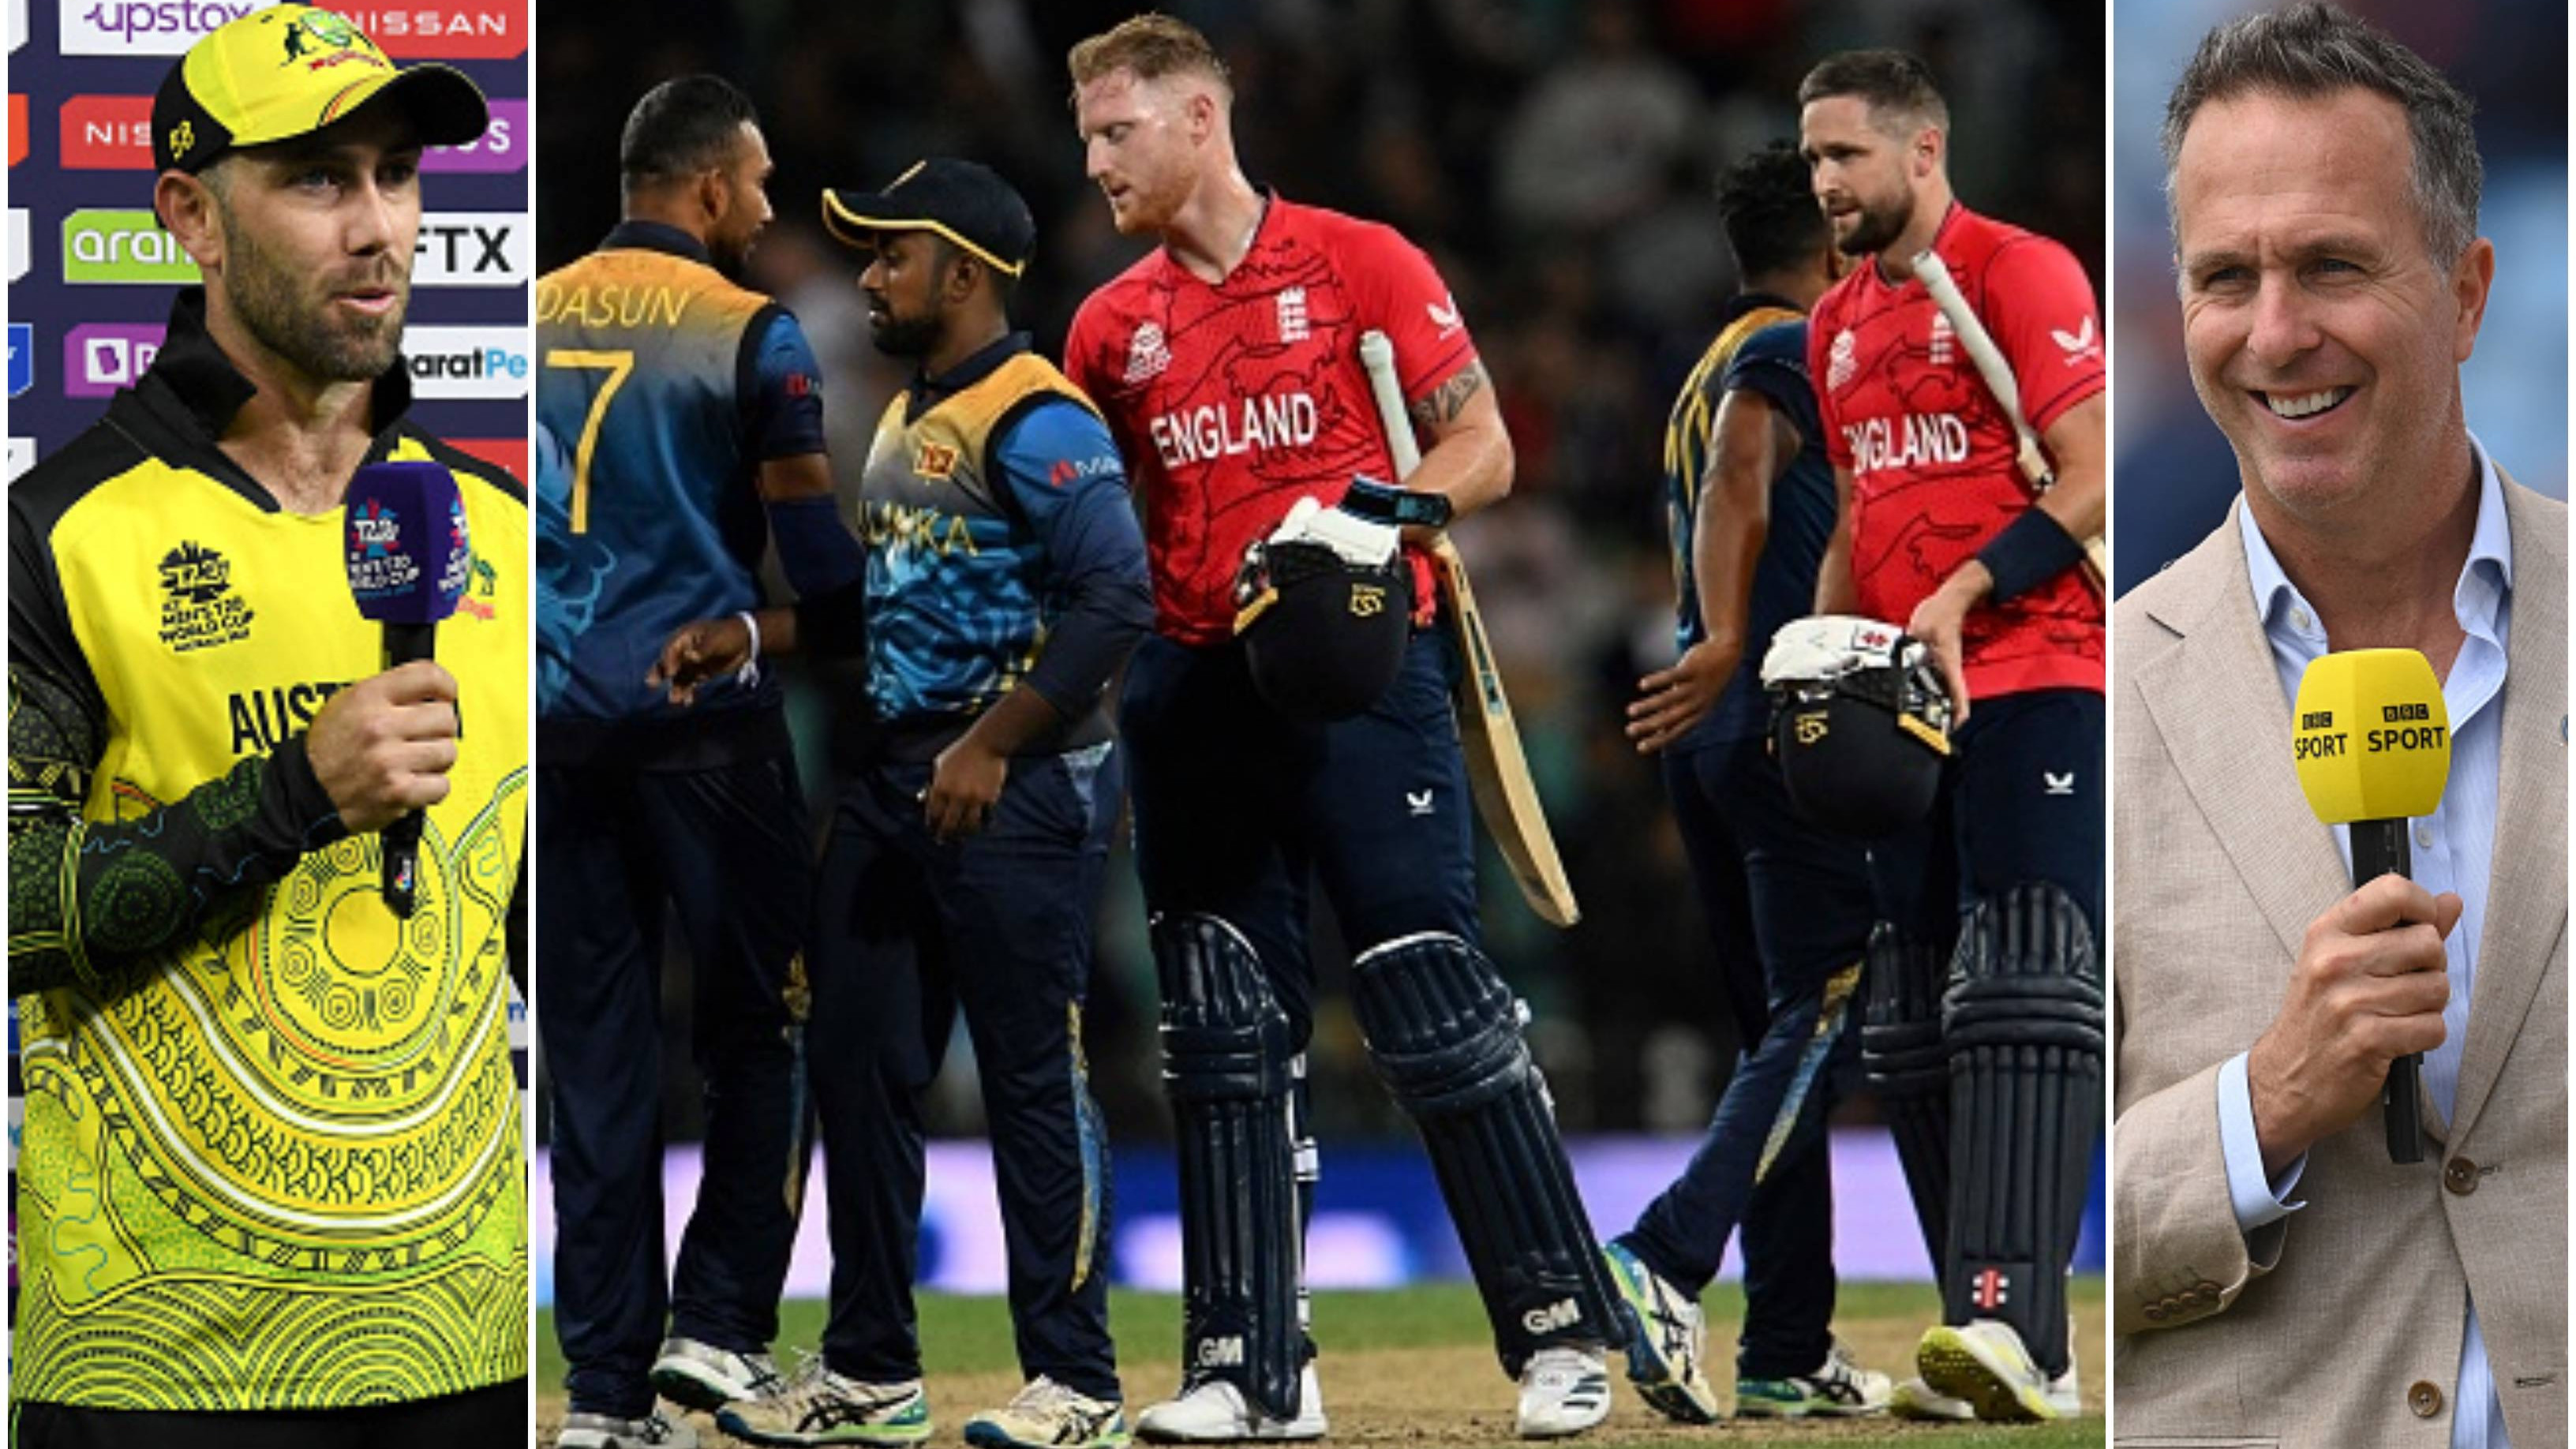 Cricket fraternity reacts as England knock Australia out of T20 World Cup 2022 with 4-wicket win over Sri Lanka